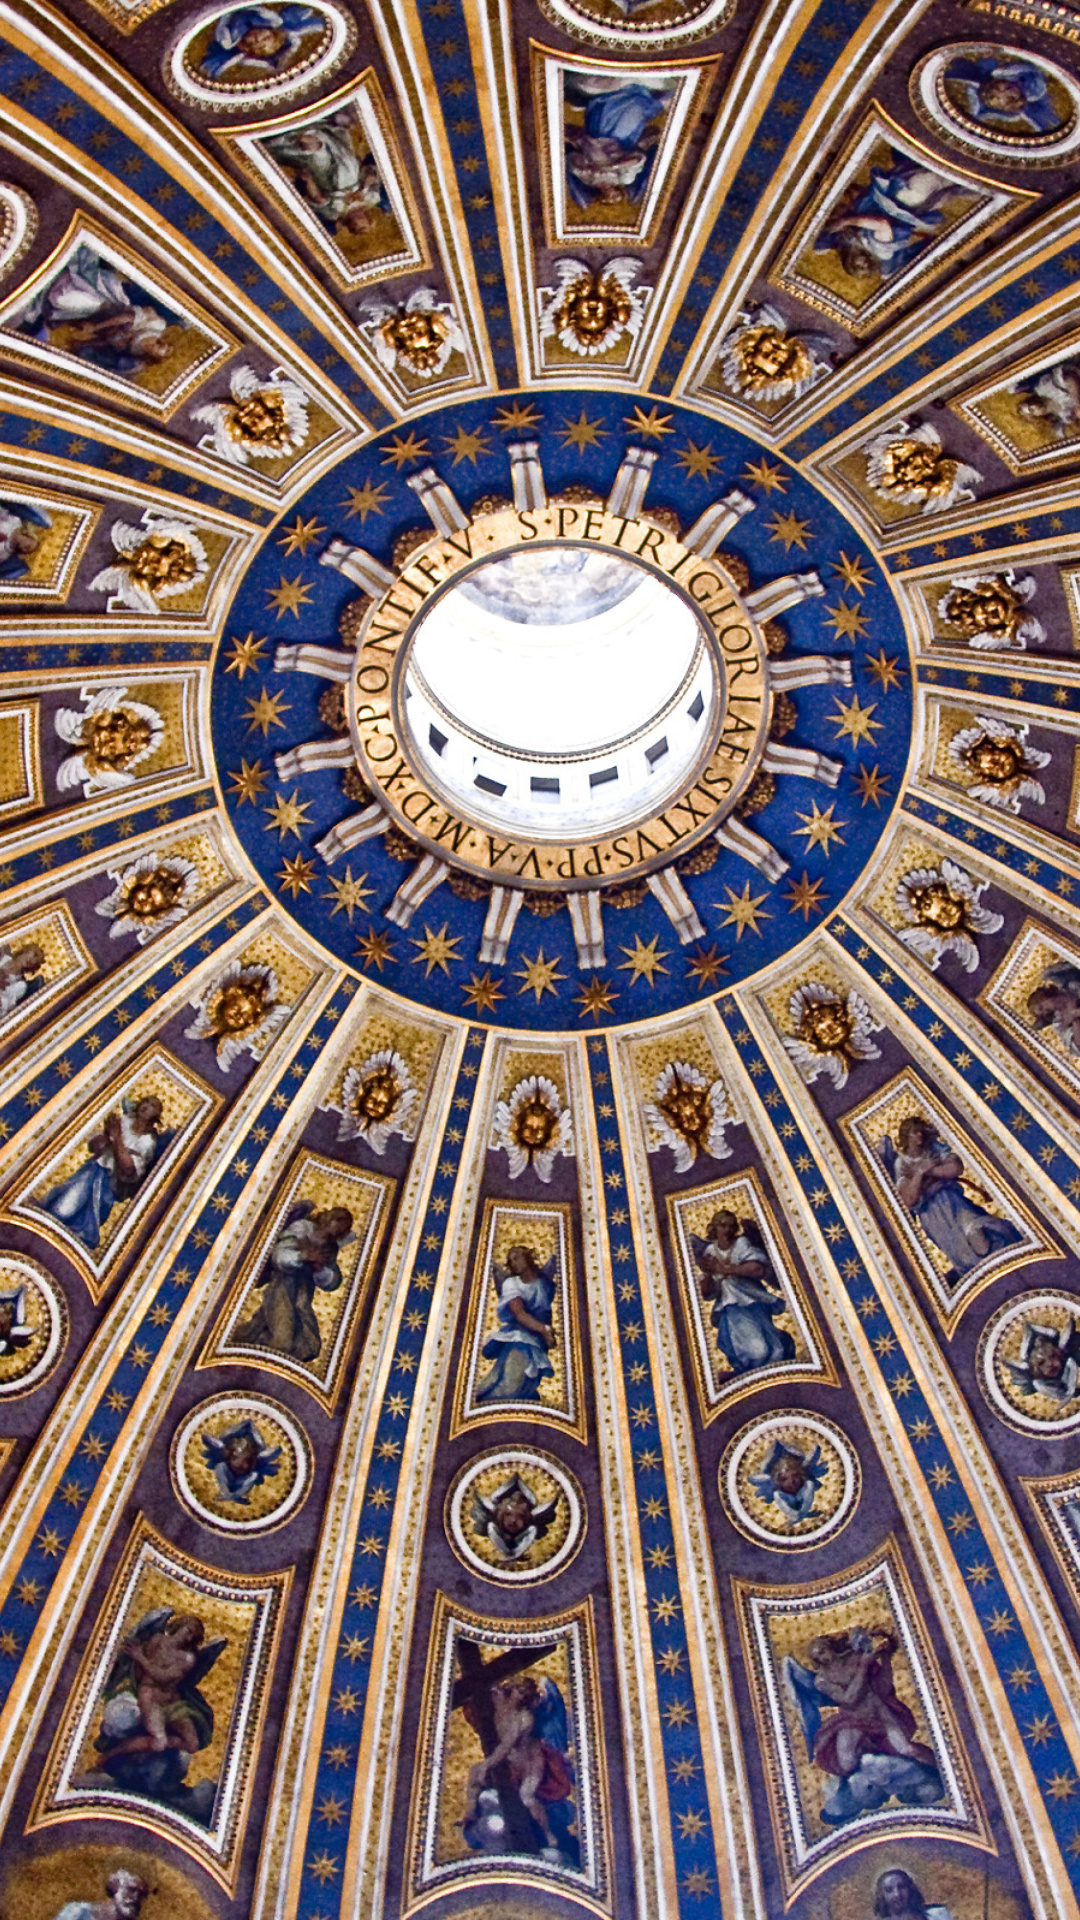 Das Papal Basilica of St Peter in the Vatican Wallpaper 1080x1920